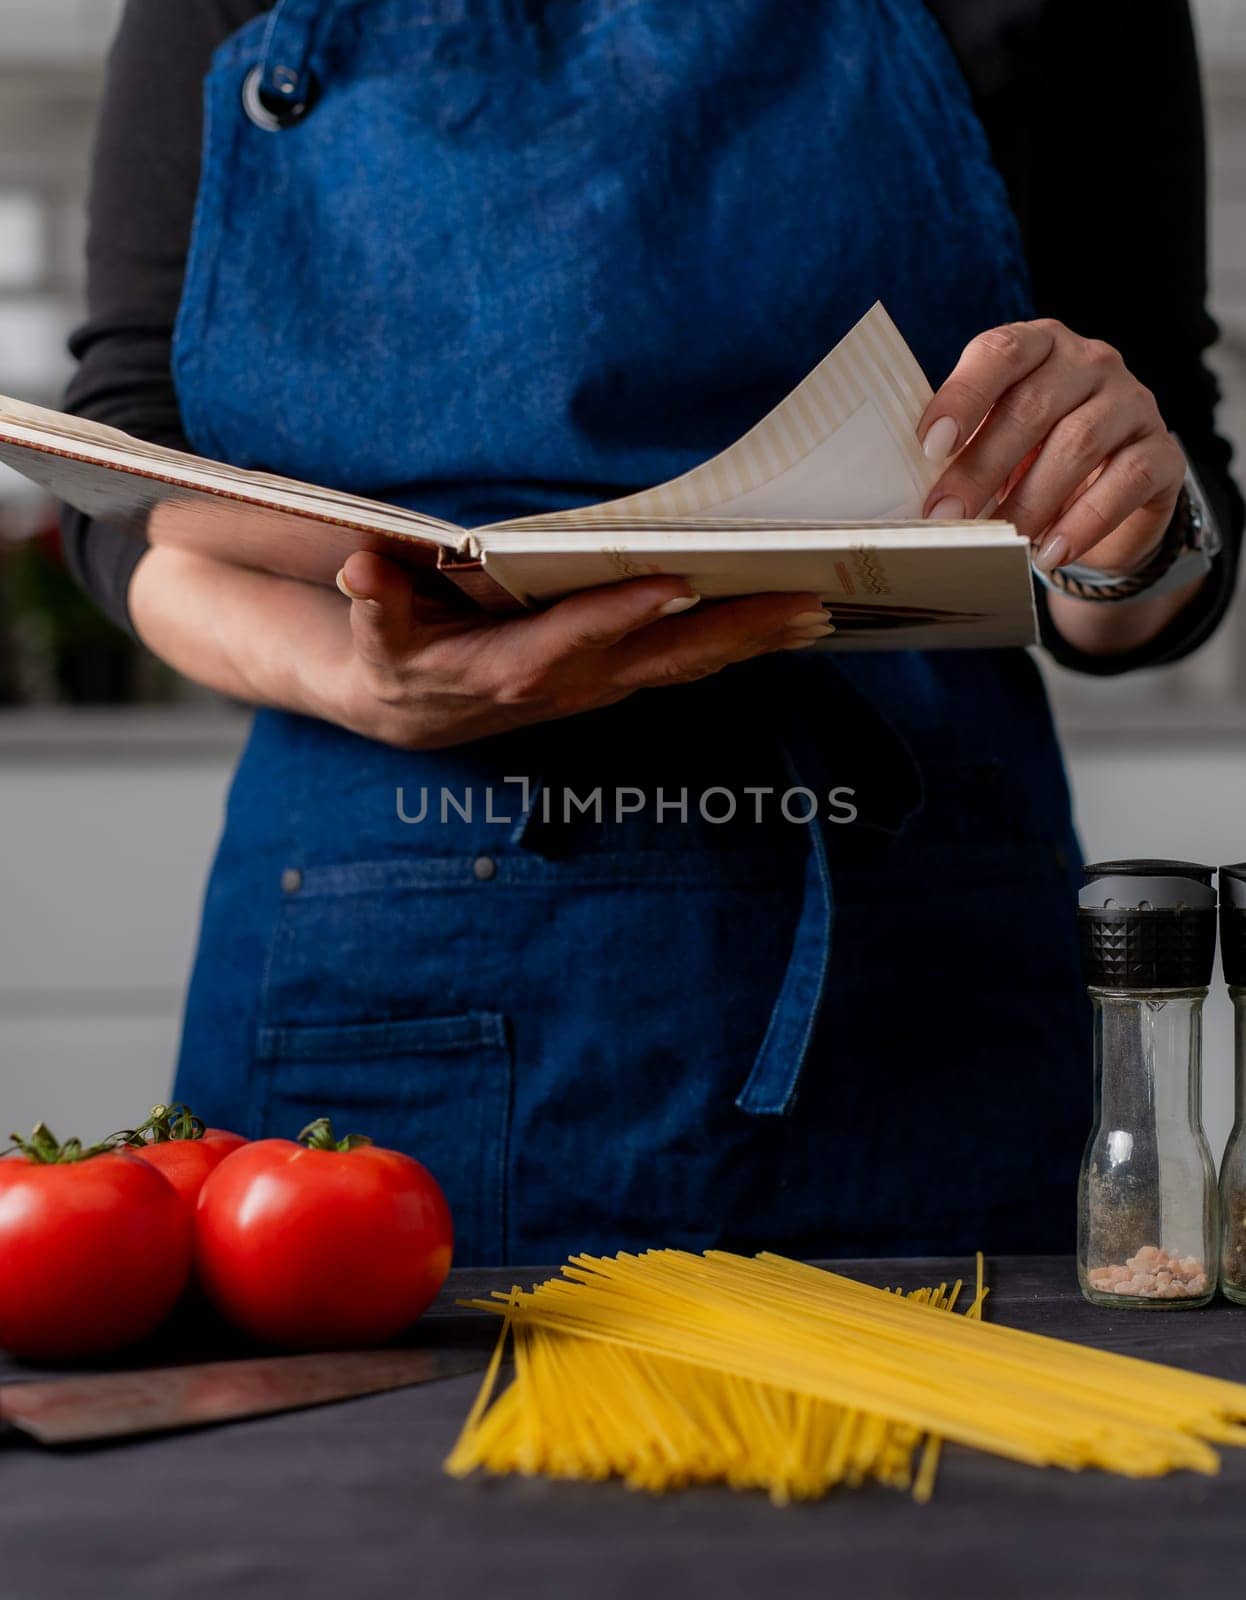 Woman'S Hands With A Recipe Book Hover Over A Table With Spaghetti, Tomatoes, Spices, And Basil